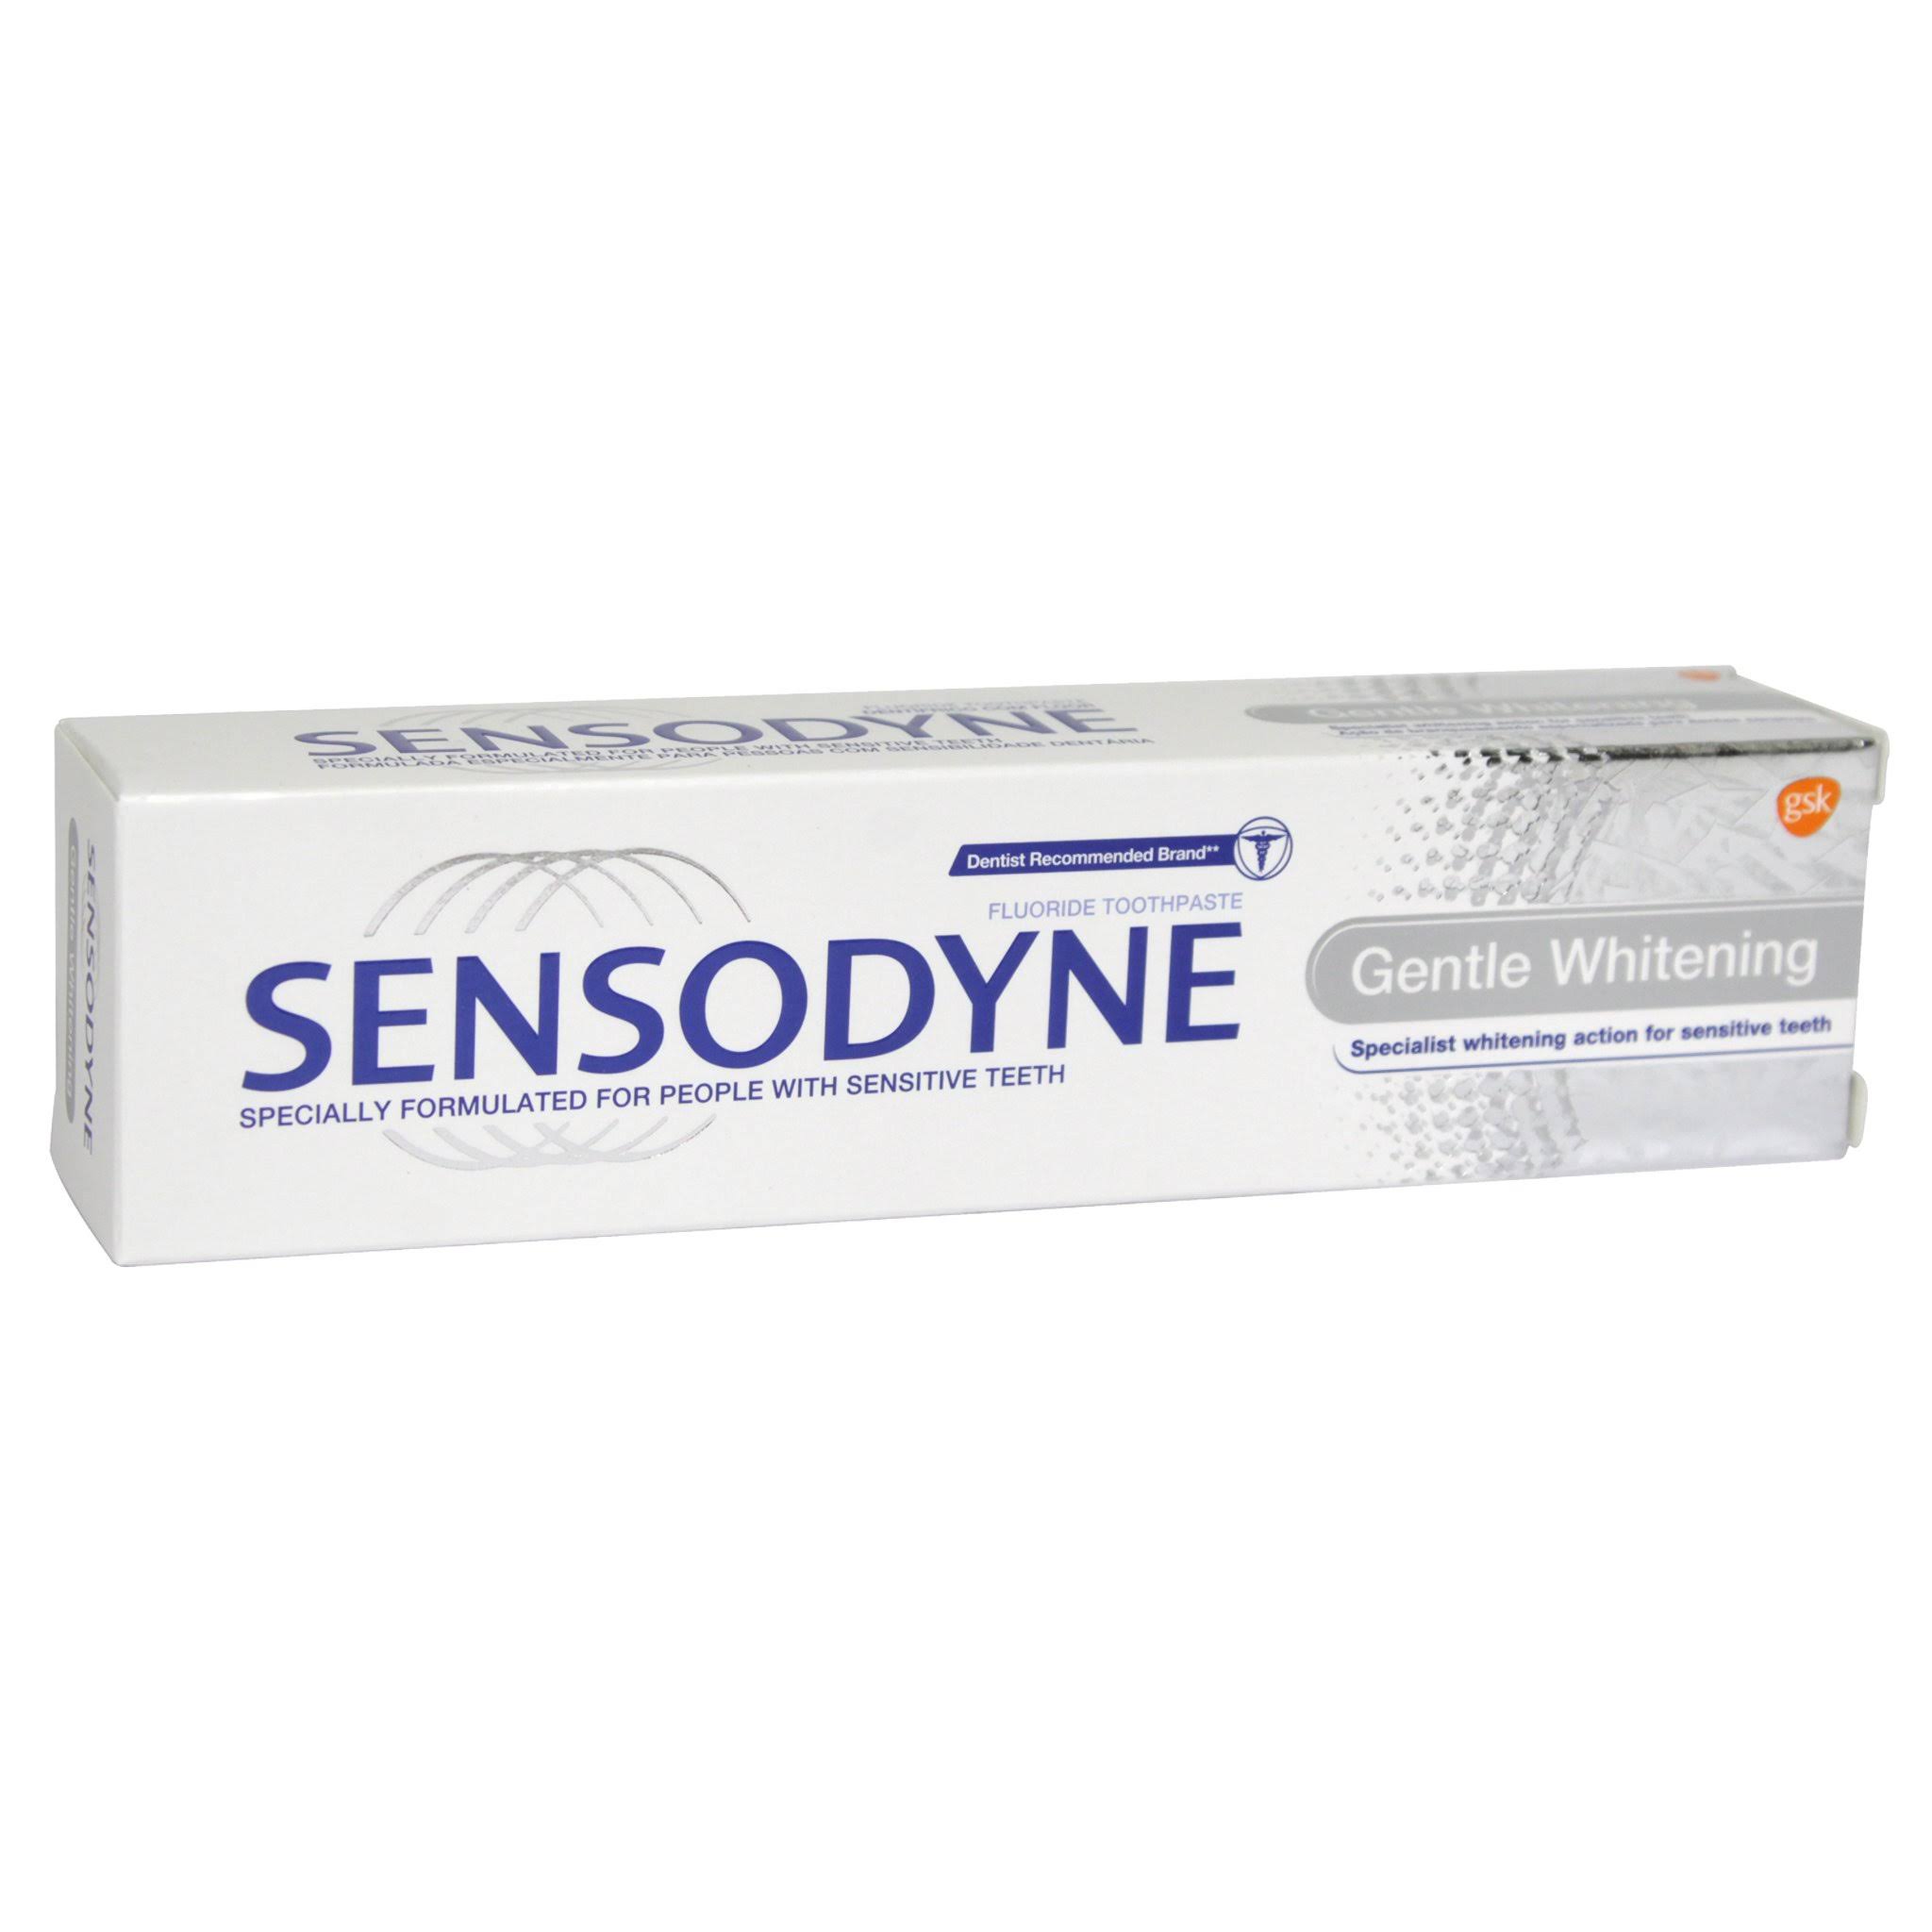 Sensodyne Toothpaste 75ml Daily Care Gentle Whitening x12 (Pack of 12)